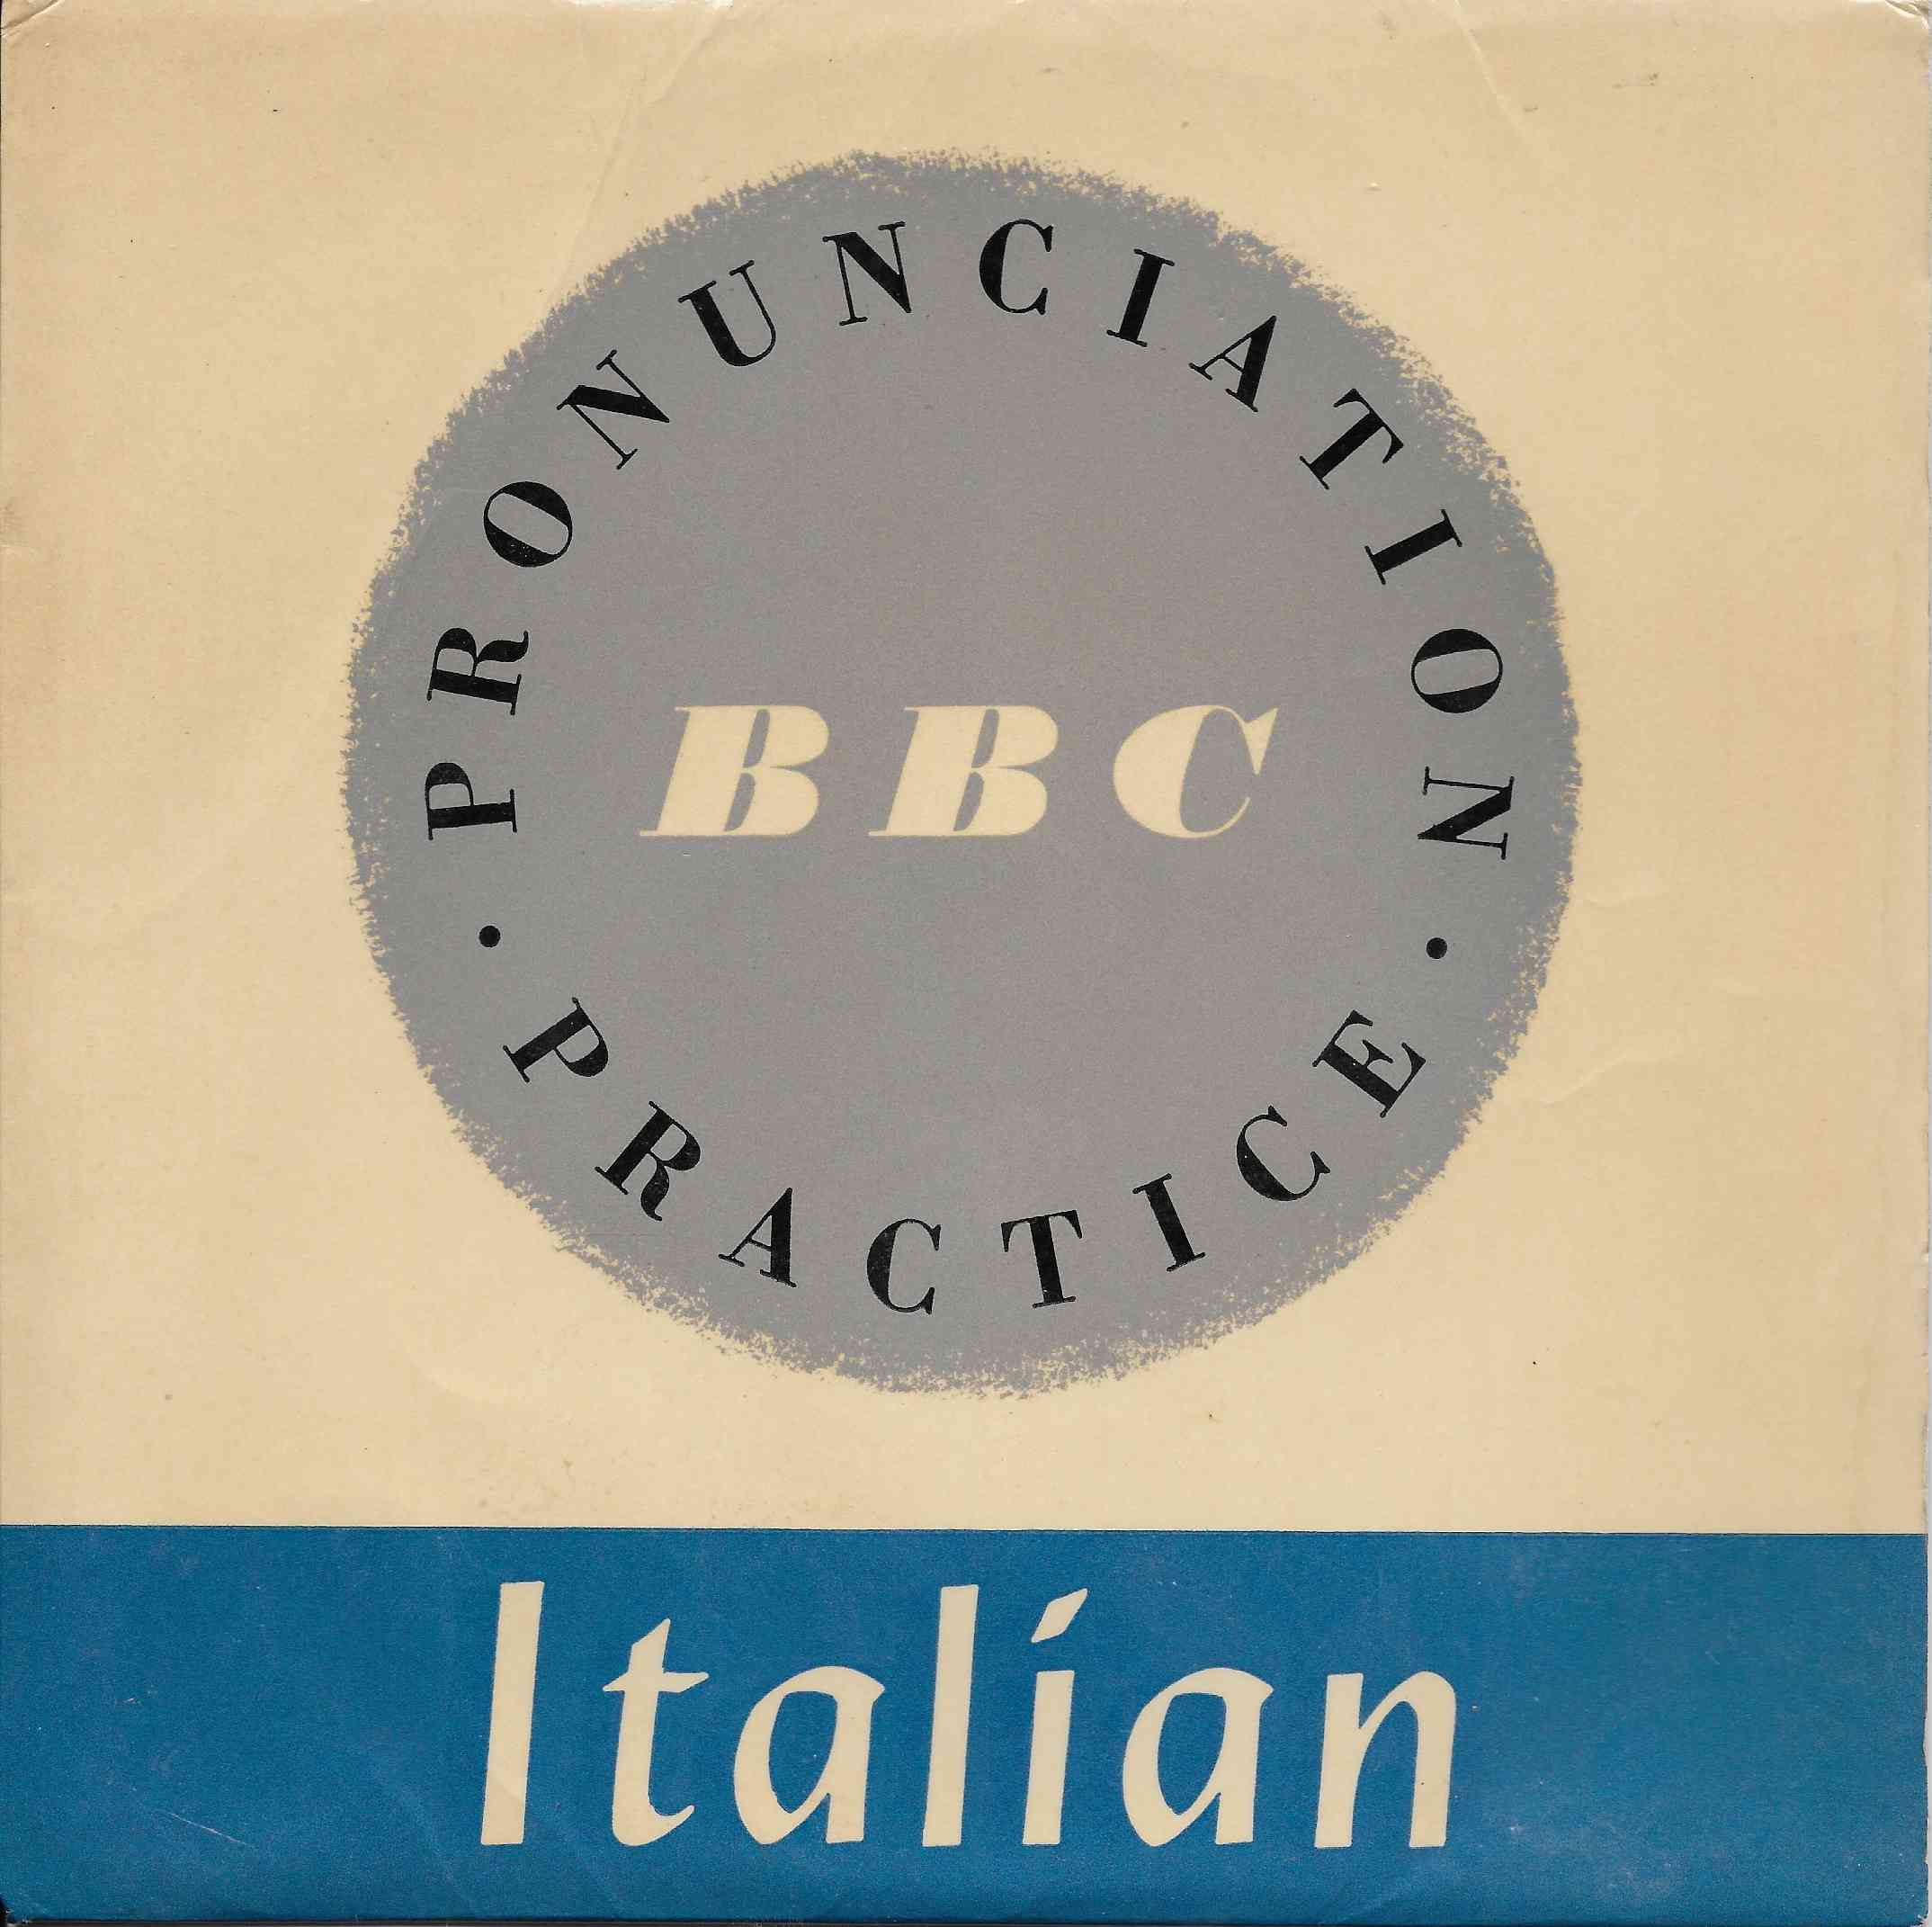 Picture of ITA-A-1 Italian by artist Elsie Ferguson from the BBC records and Tapes library